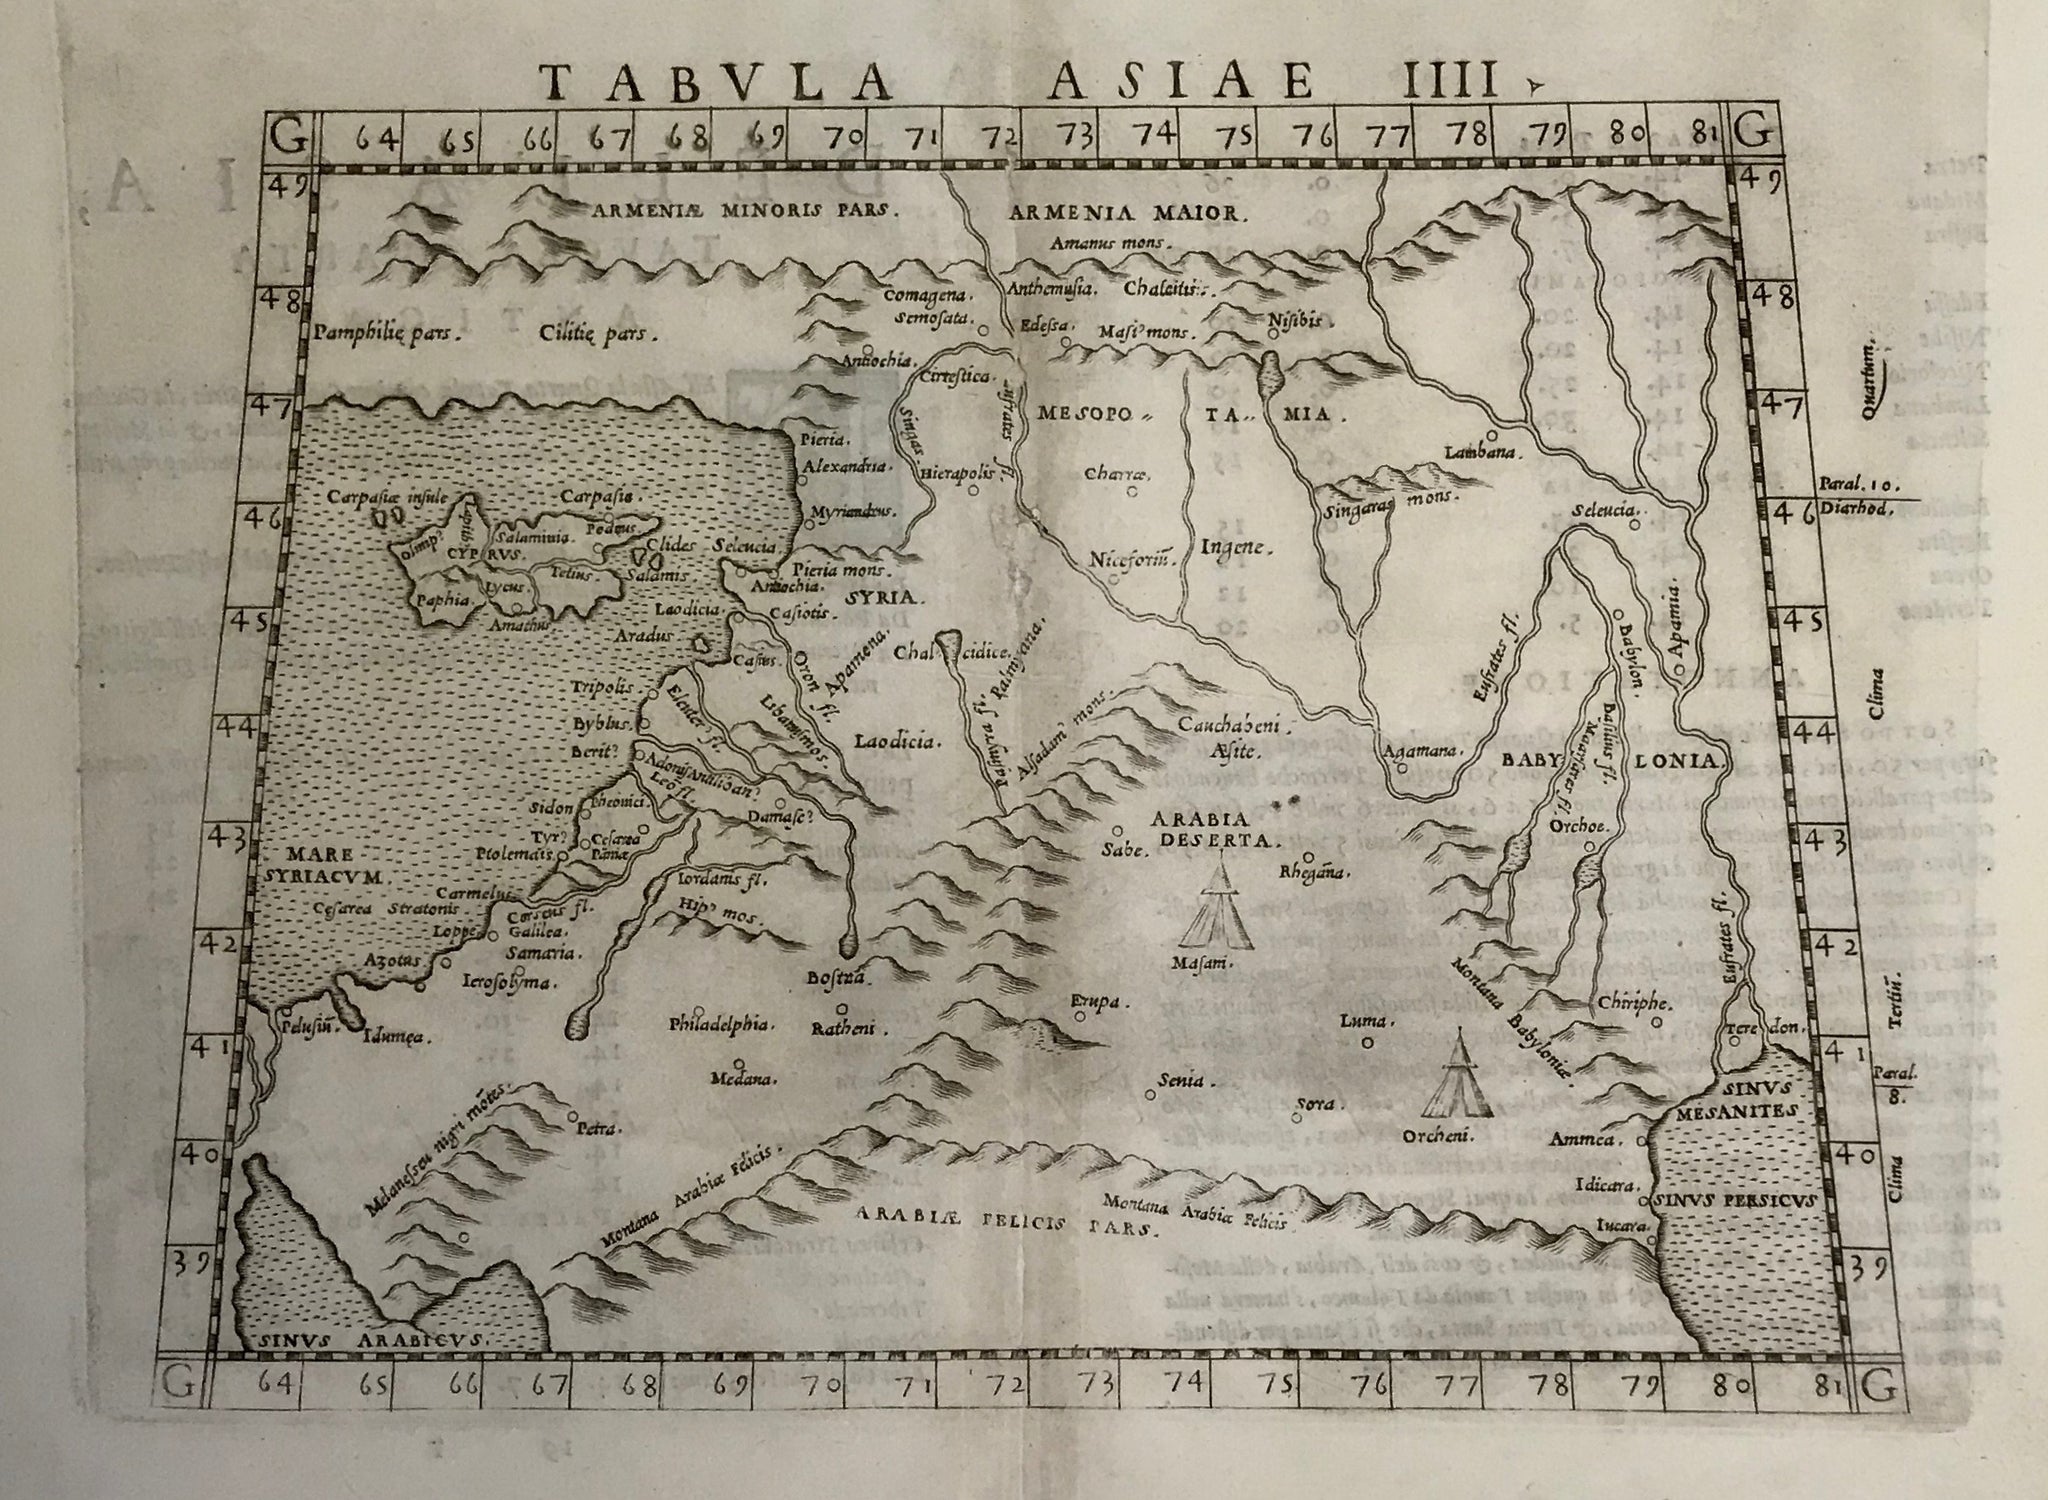 "Tabula Asiae IIII". Copper etching from: "Geographia" by Claudio Ptolemy. Originally edited and published by Willibald Pirckheimer. This edition, which comprises all 64 maps of the "B" edition, including the "New World", was published by Josephus Meletius 1562 in Venice.  Syria, the Holy Land, Iraq, part of Iran, the northern part of Saudi Arabia, southern Turkey and Armenia are featured on this map. In the lower right is the mouth of the Euphrates river